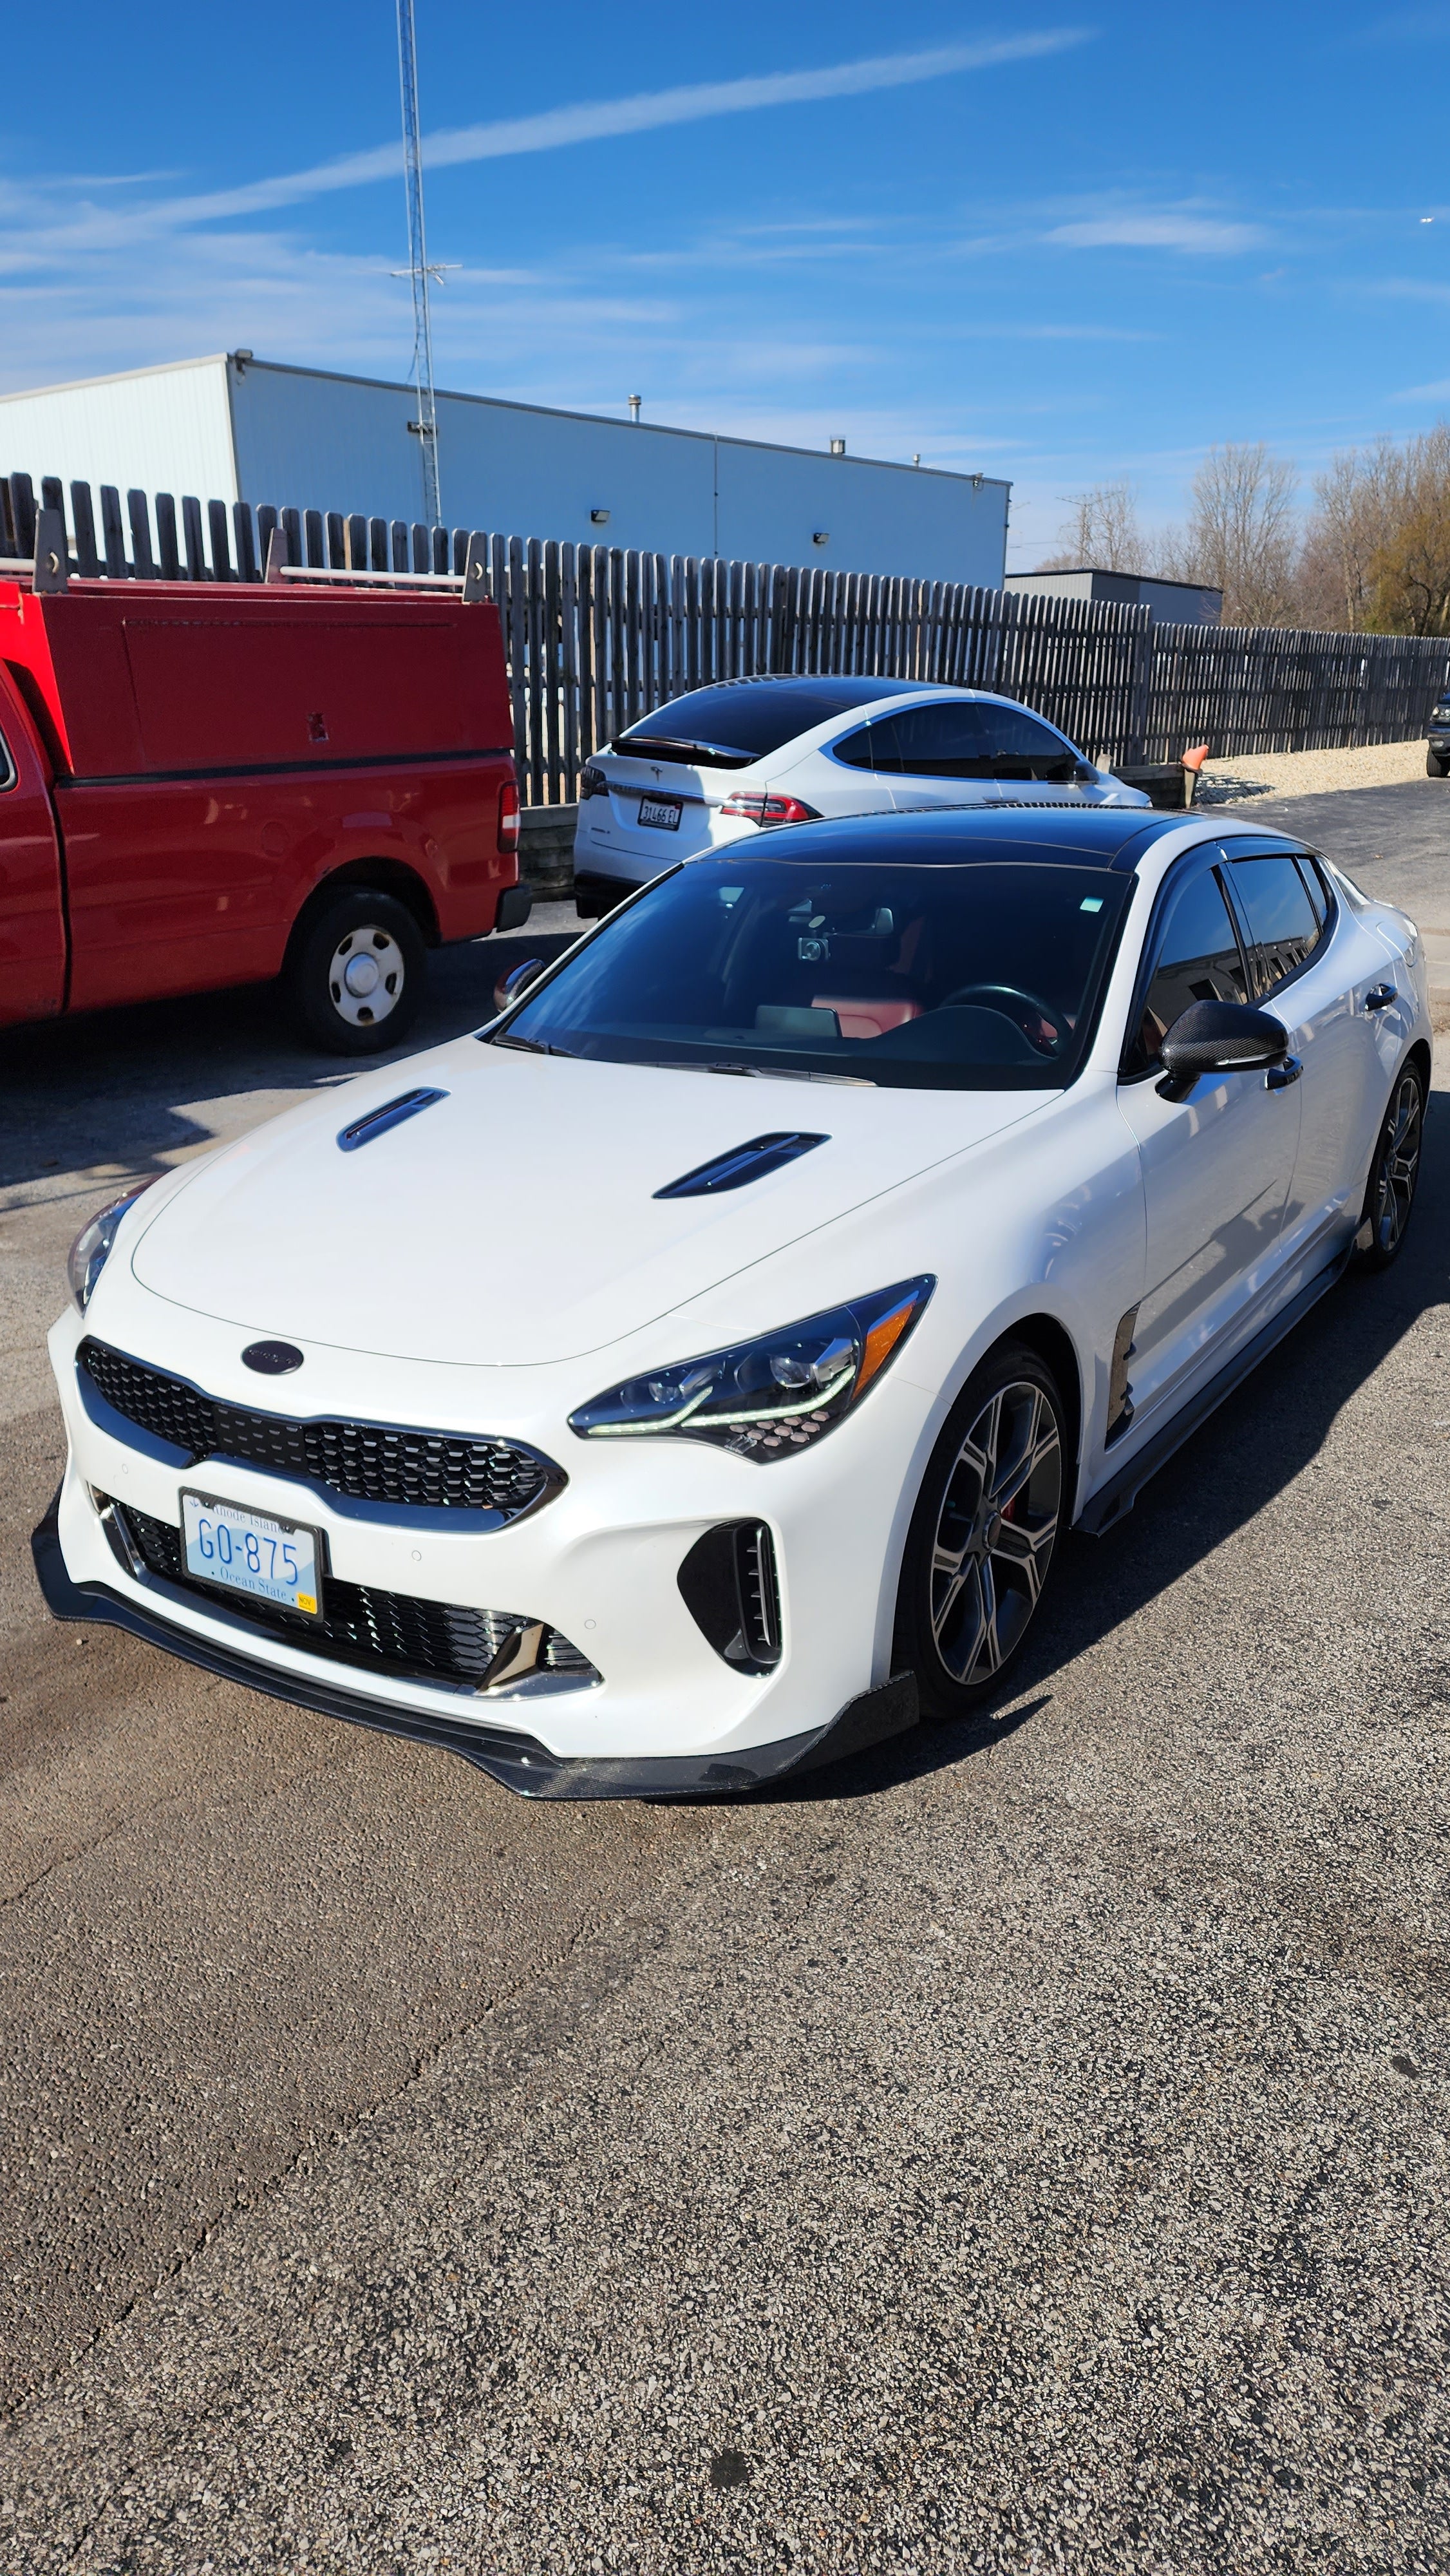 Slightly angled front view of the Kia Stinger with the Jalisco CarbonFiber Front Lip, showcasing the lip's enhancement of the car's aggressive stance